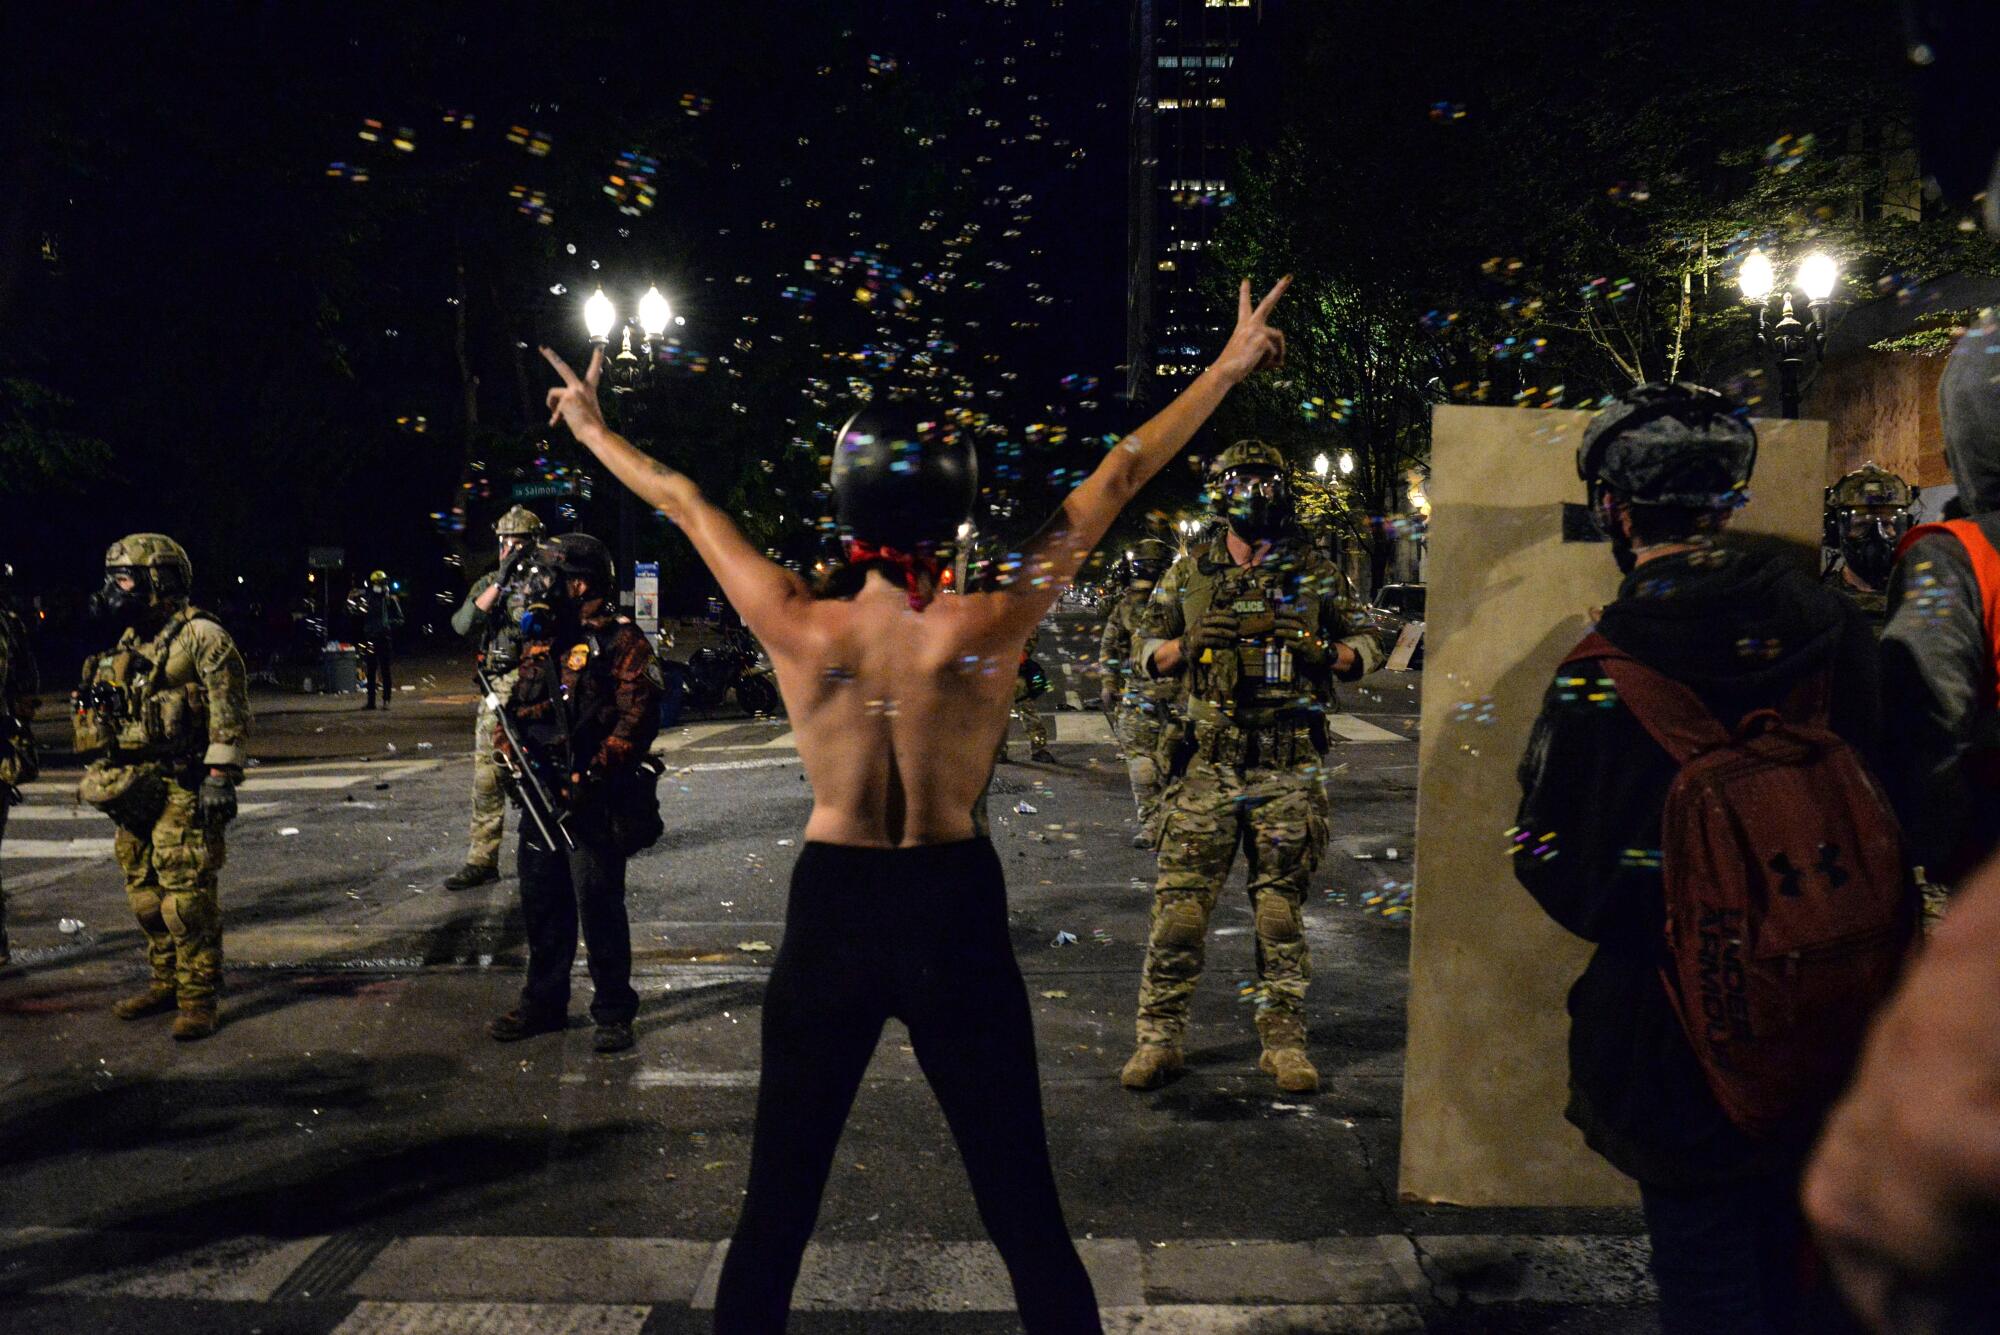 A topless protester gestures in front of federal police personnel in Portland, Ore.